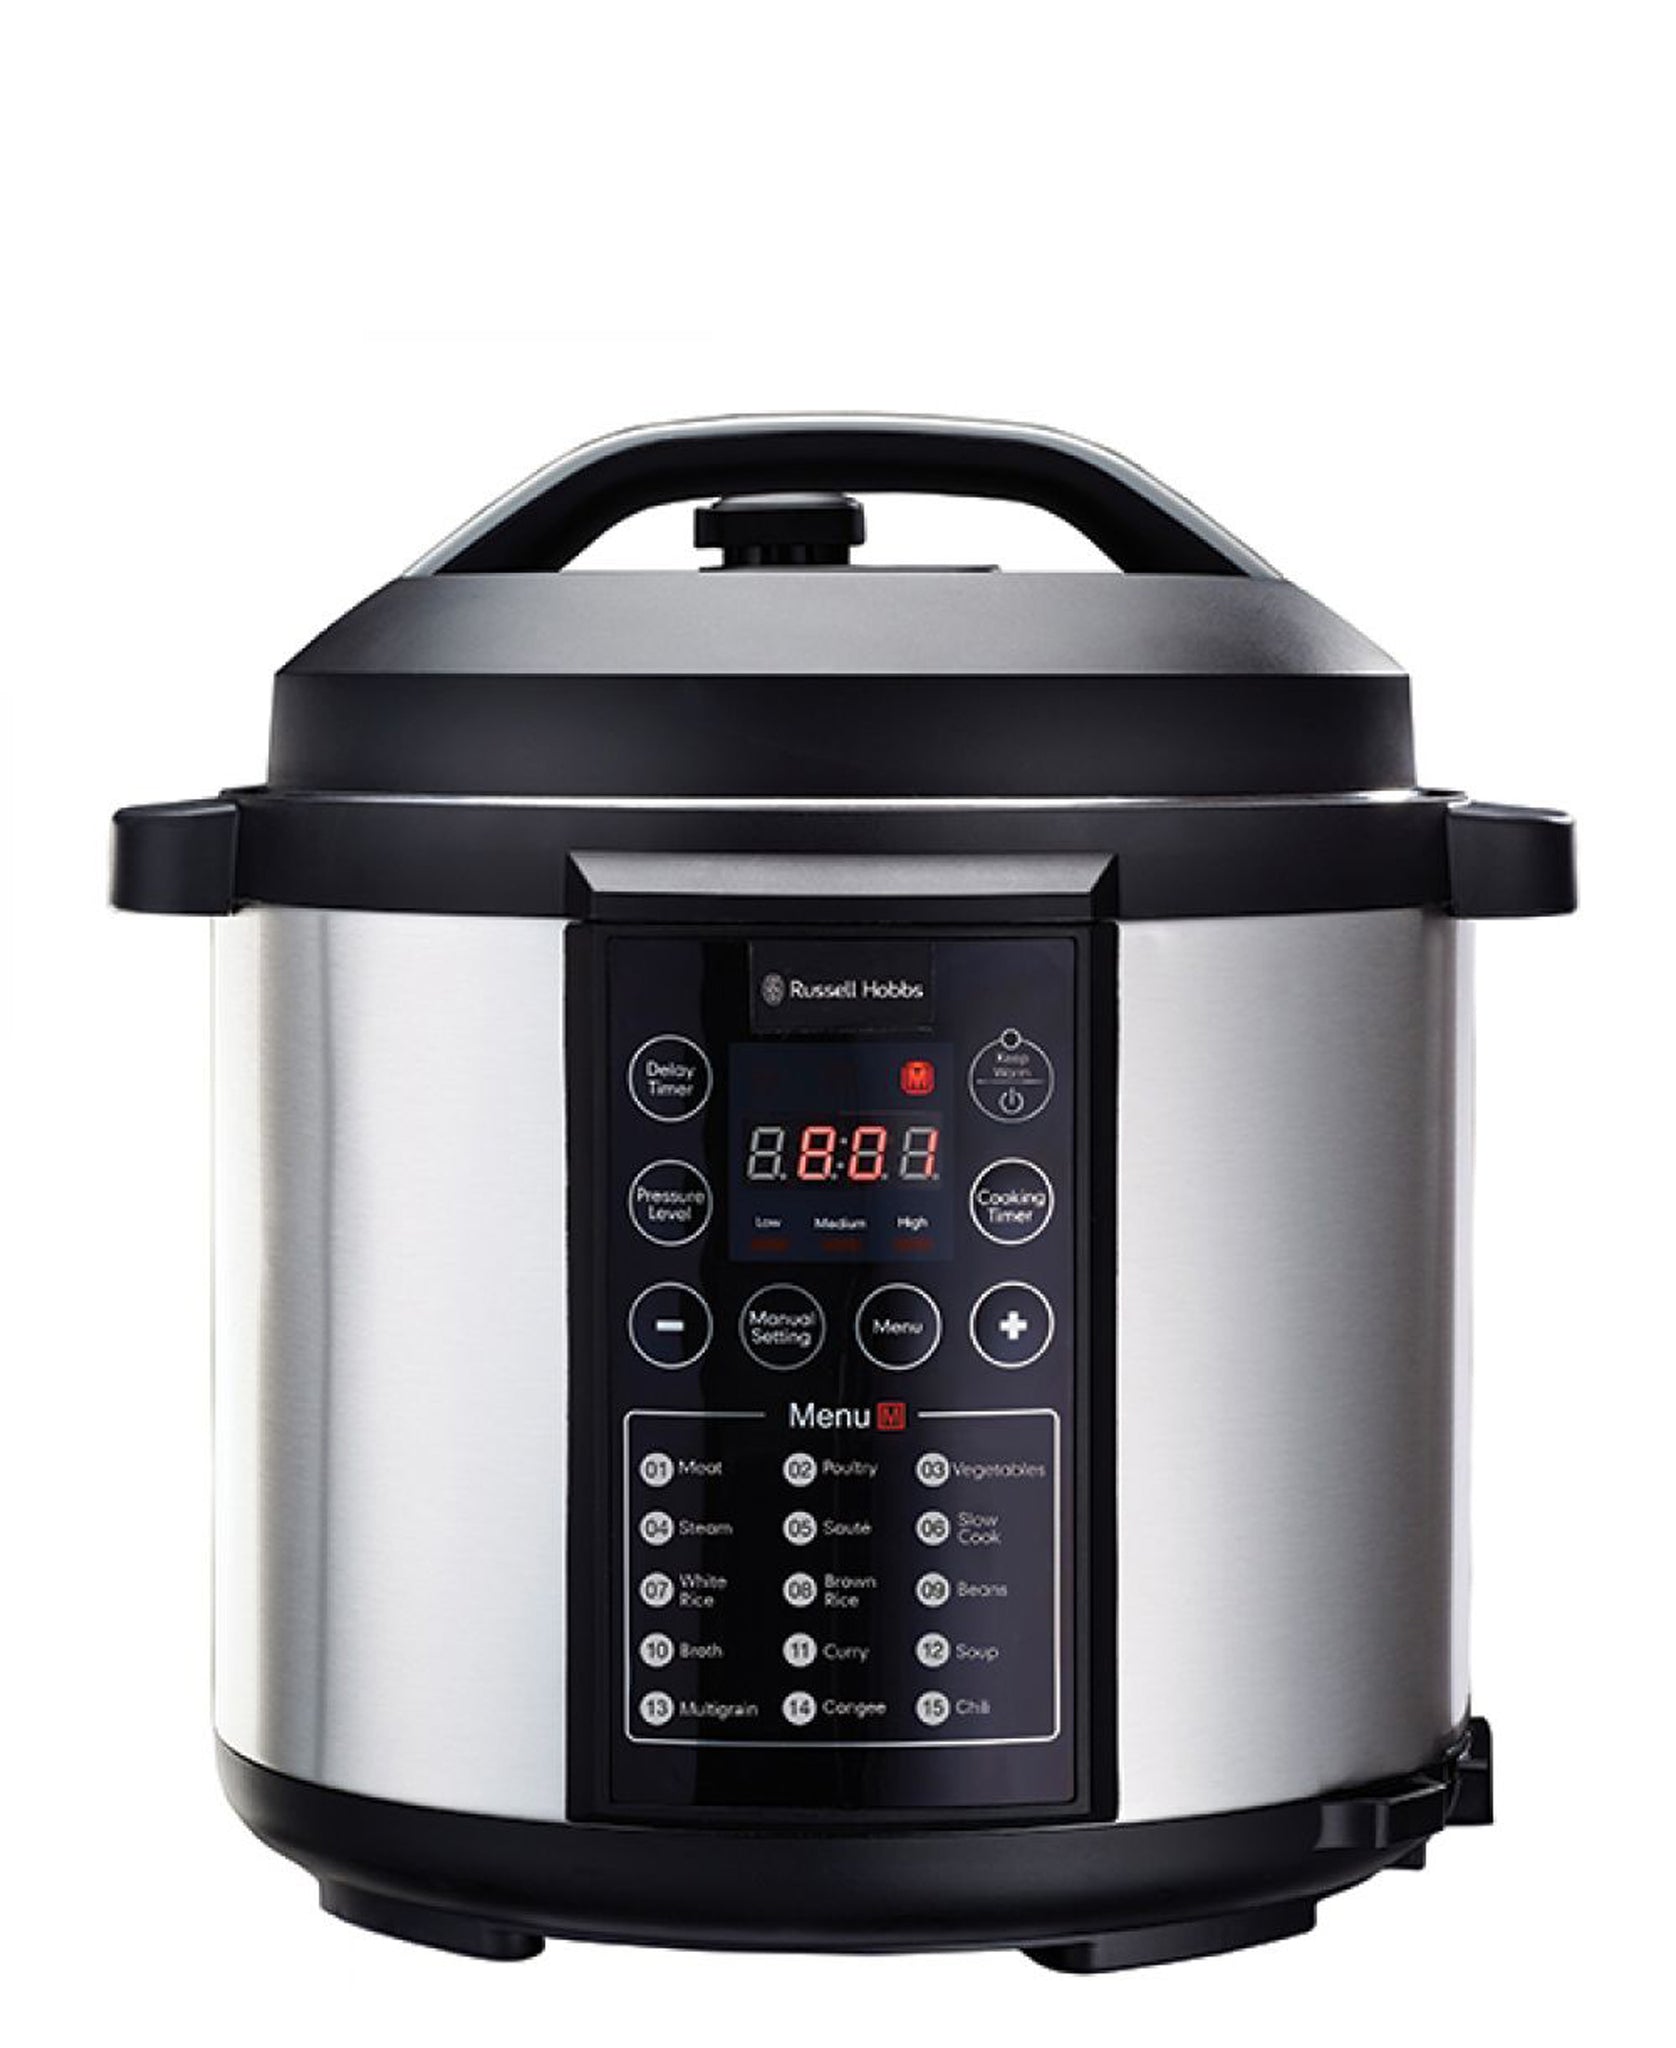 Russell Hobbs 6L Electric Pressure Cooker - Silver